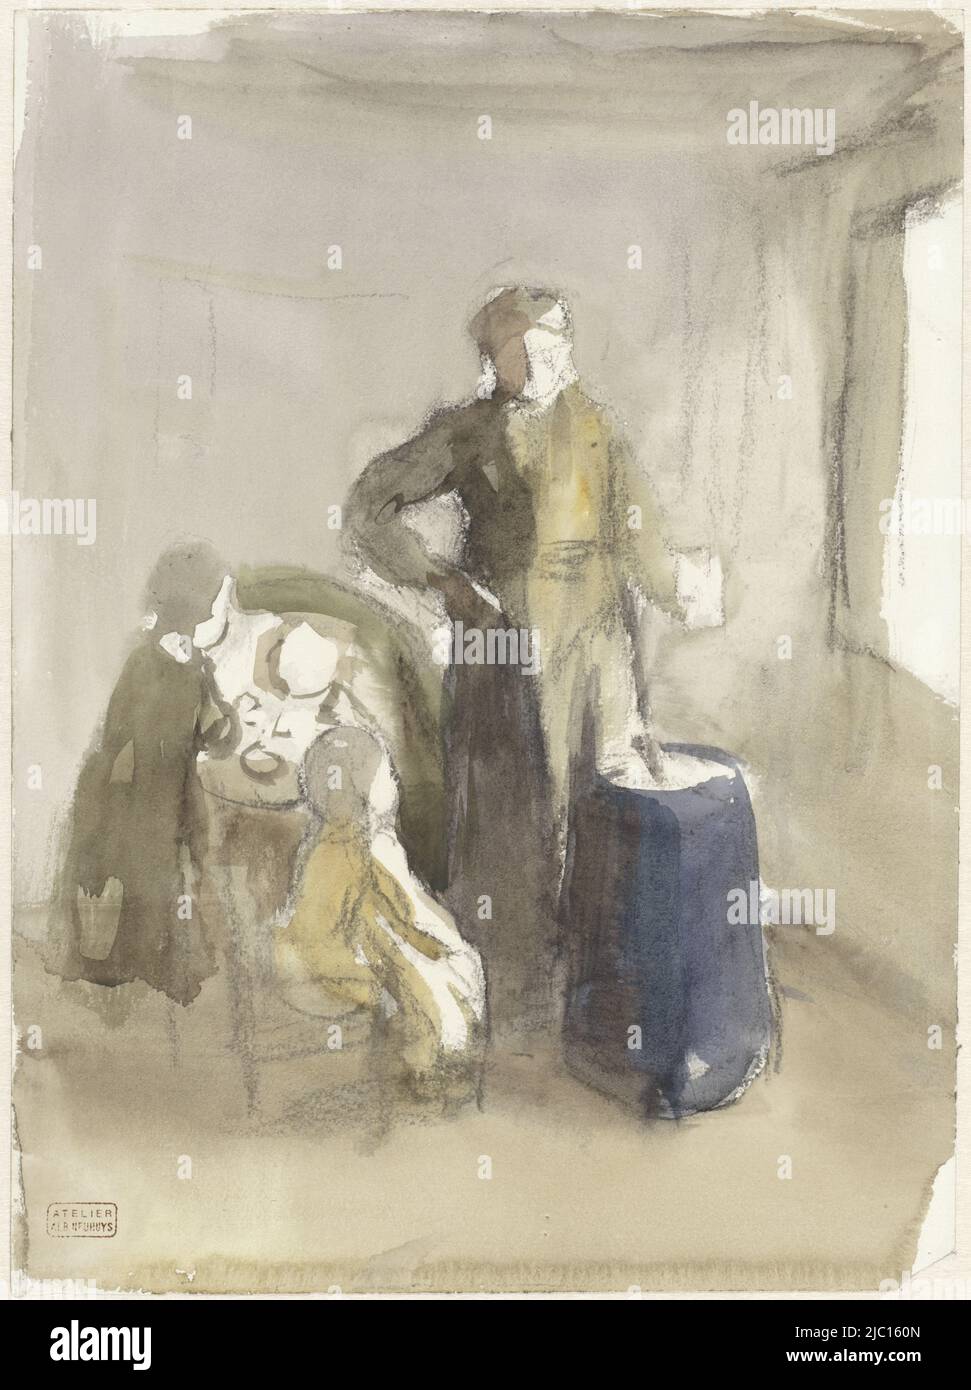 Interior with wife and children near a churn, draughtsman: Albert Neuhuys (1844-1914), 1854 - 1914, paper, brush, h 340 mm × w 250 mm Stock Photo